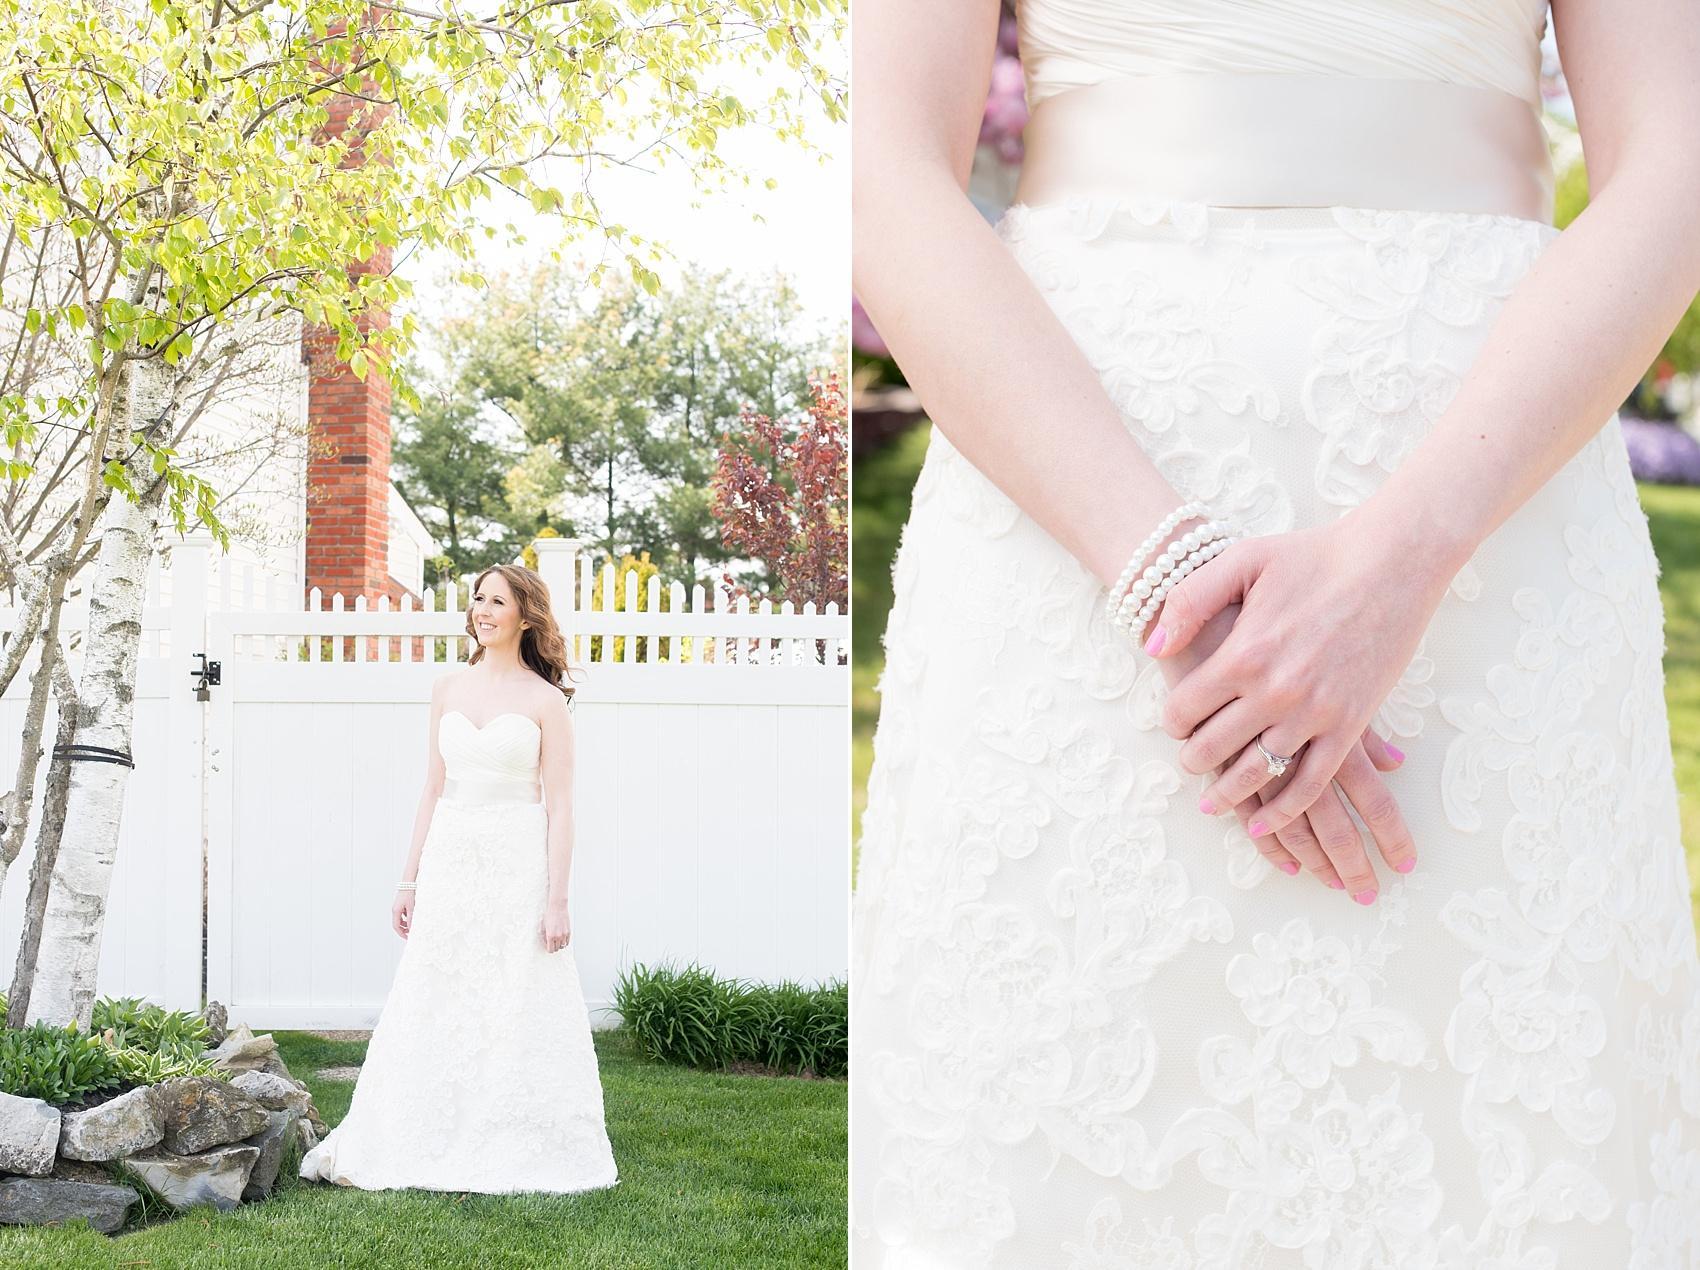 Photos by Mikkel Paige Photography for a wedding at Harbor Club on Long Island. Bridal portraits in spring time.